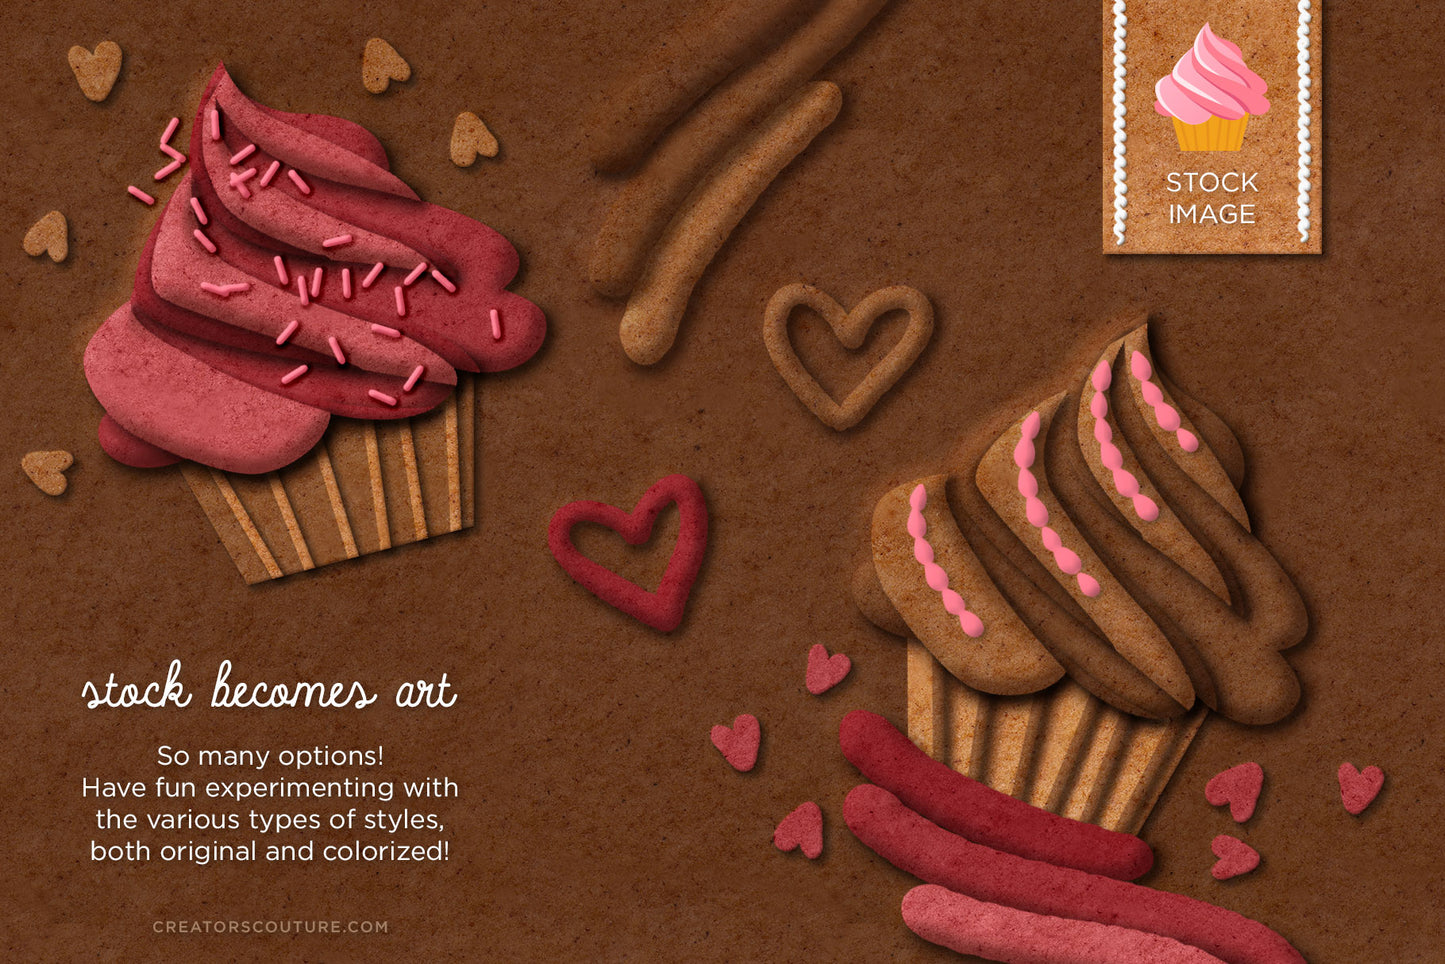 Gingerbread, Cookie, & Cake Graphic & Lettering Effects for Photoshop, cupcake illustrations